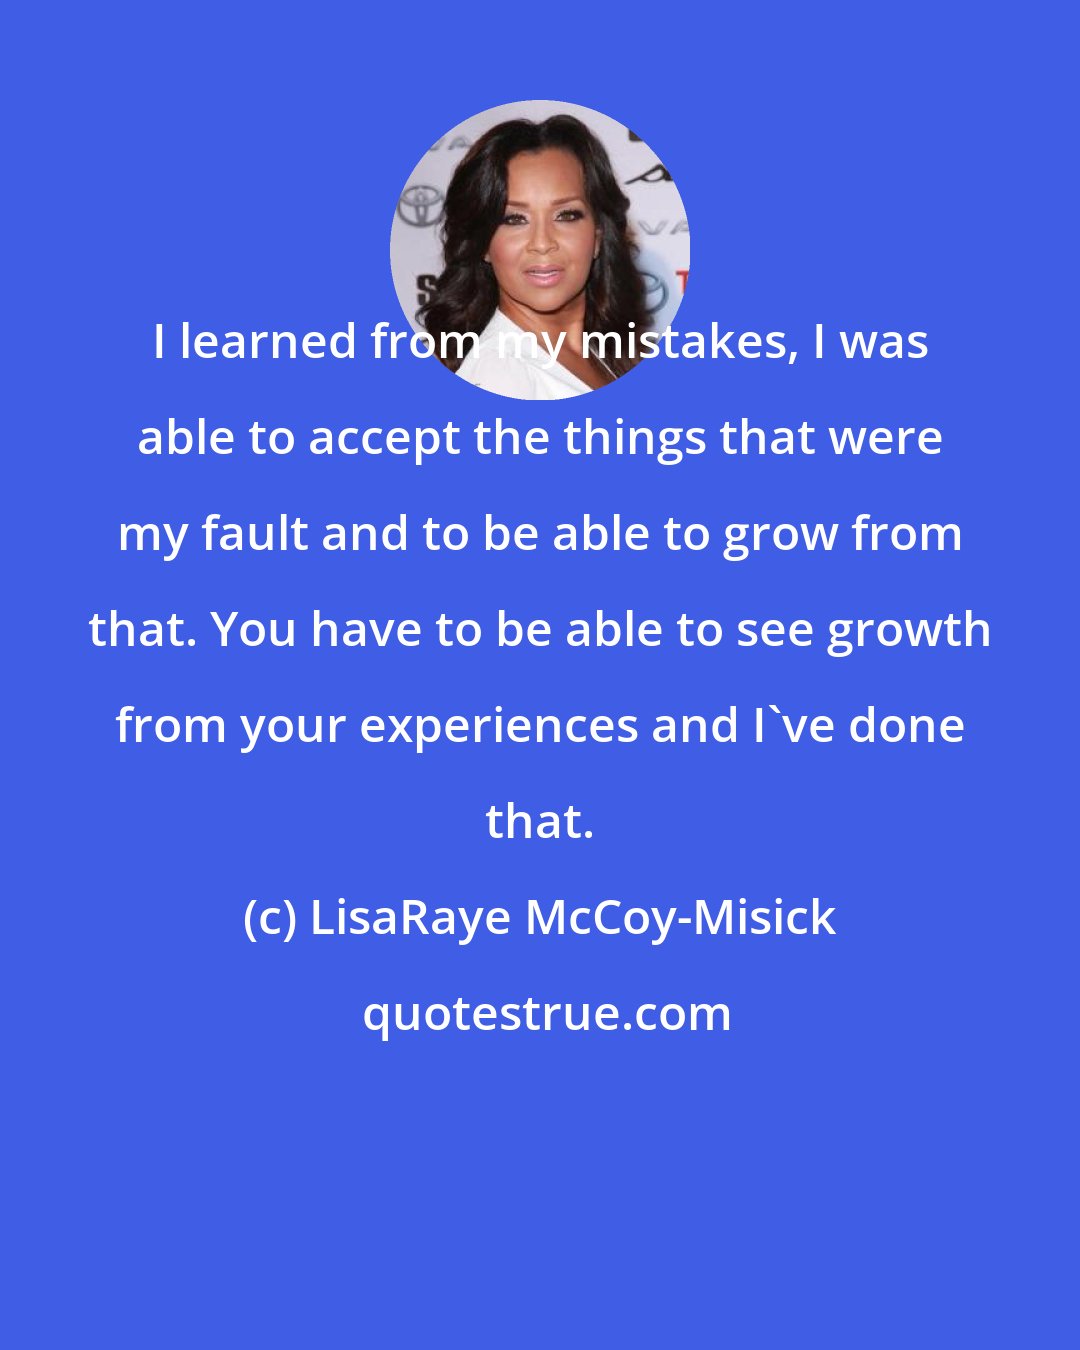 LisaRaye McCoy-Misick: I learned from my mistakes, I was able to accept the things that were my fault and to be able to grow from that. You have to be able to see growth from your experiences and I've done that.